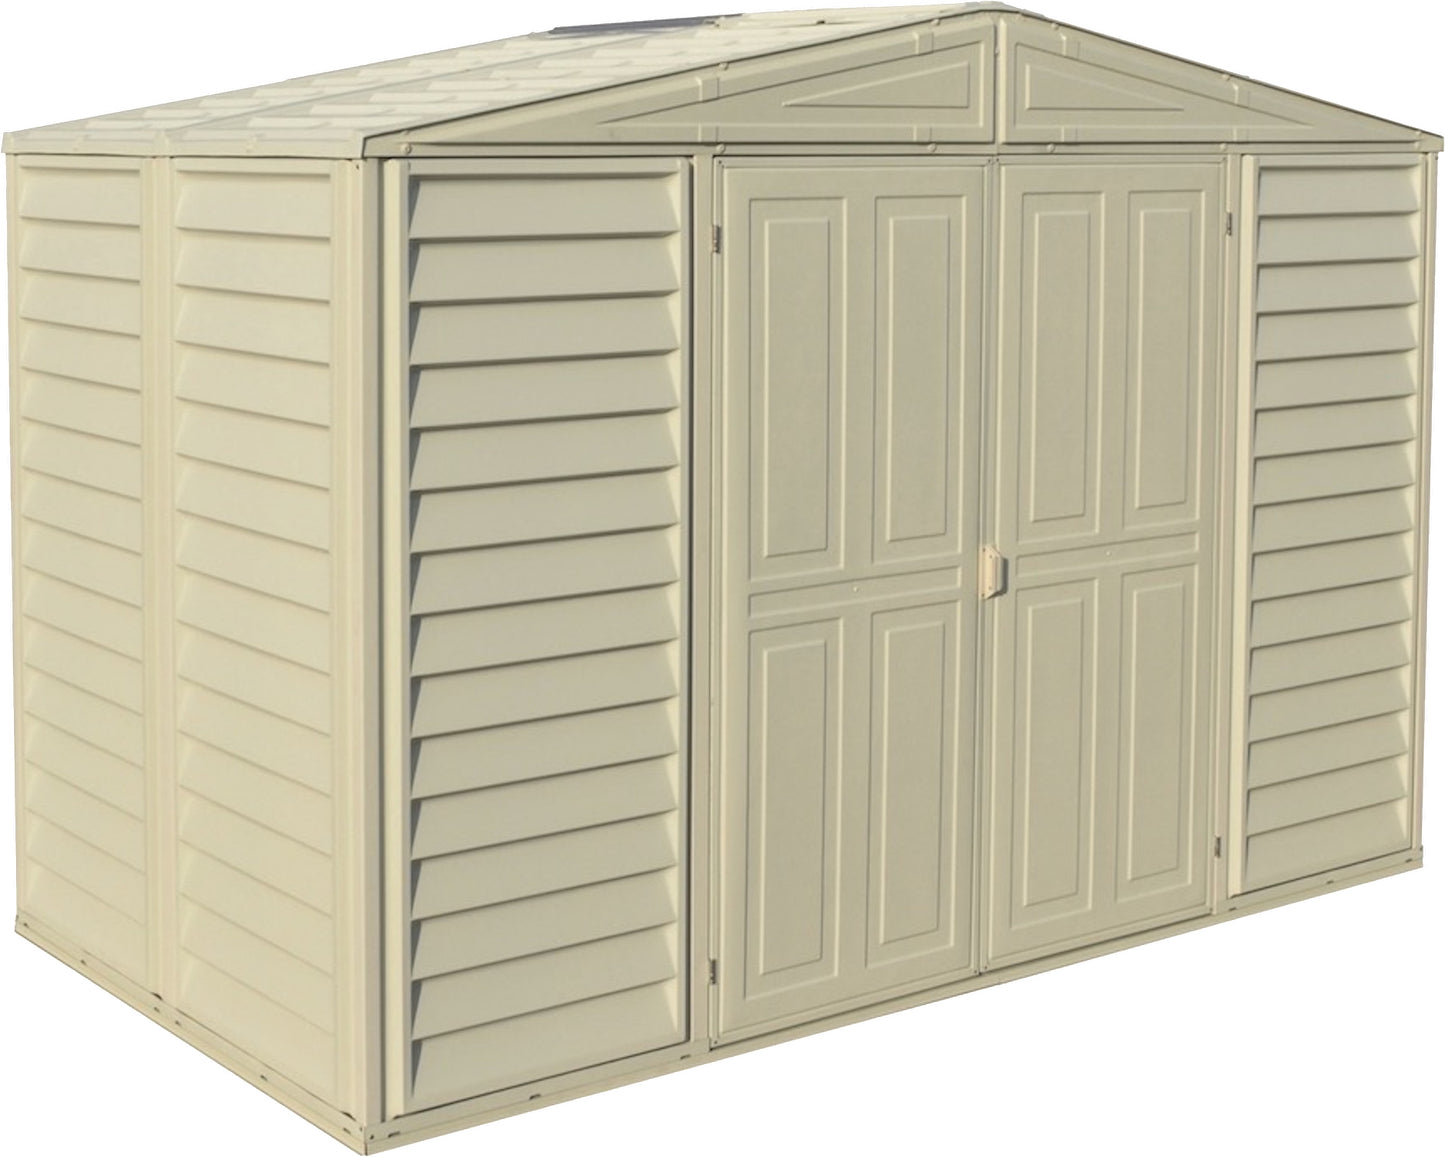 DuraMax 10.5ft x 5ft Woodbridge Vinyl Storage Shed with Foundation Kit (East Coast Purchase Only)